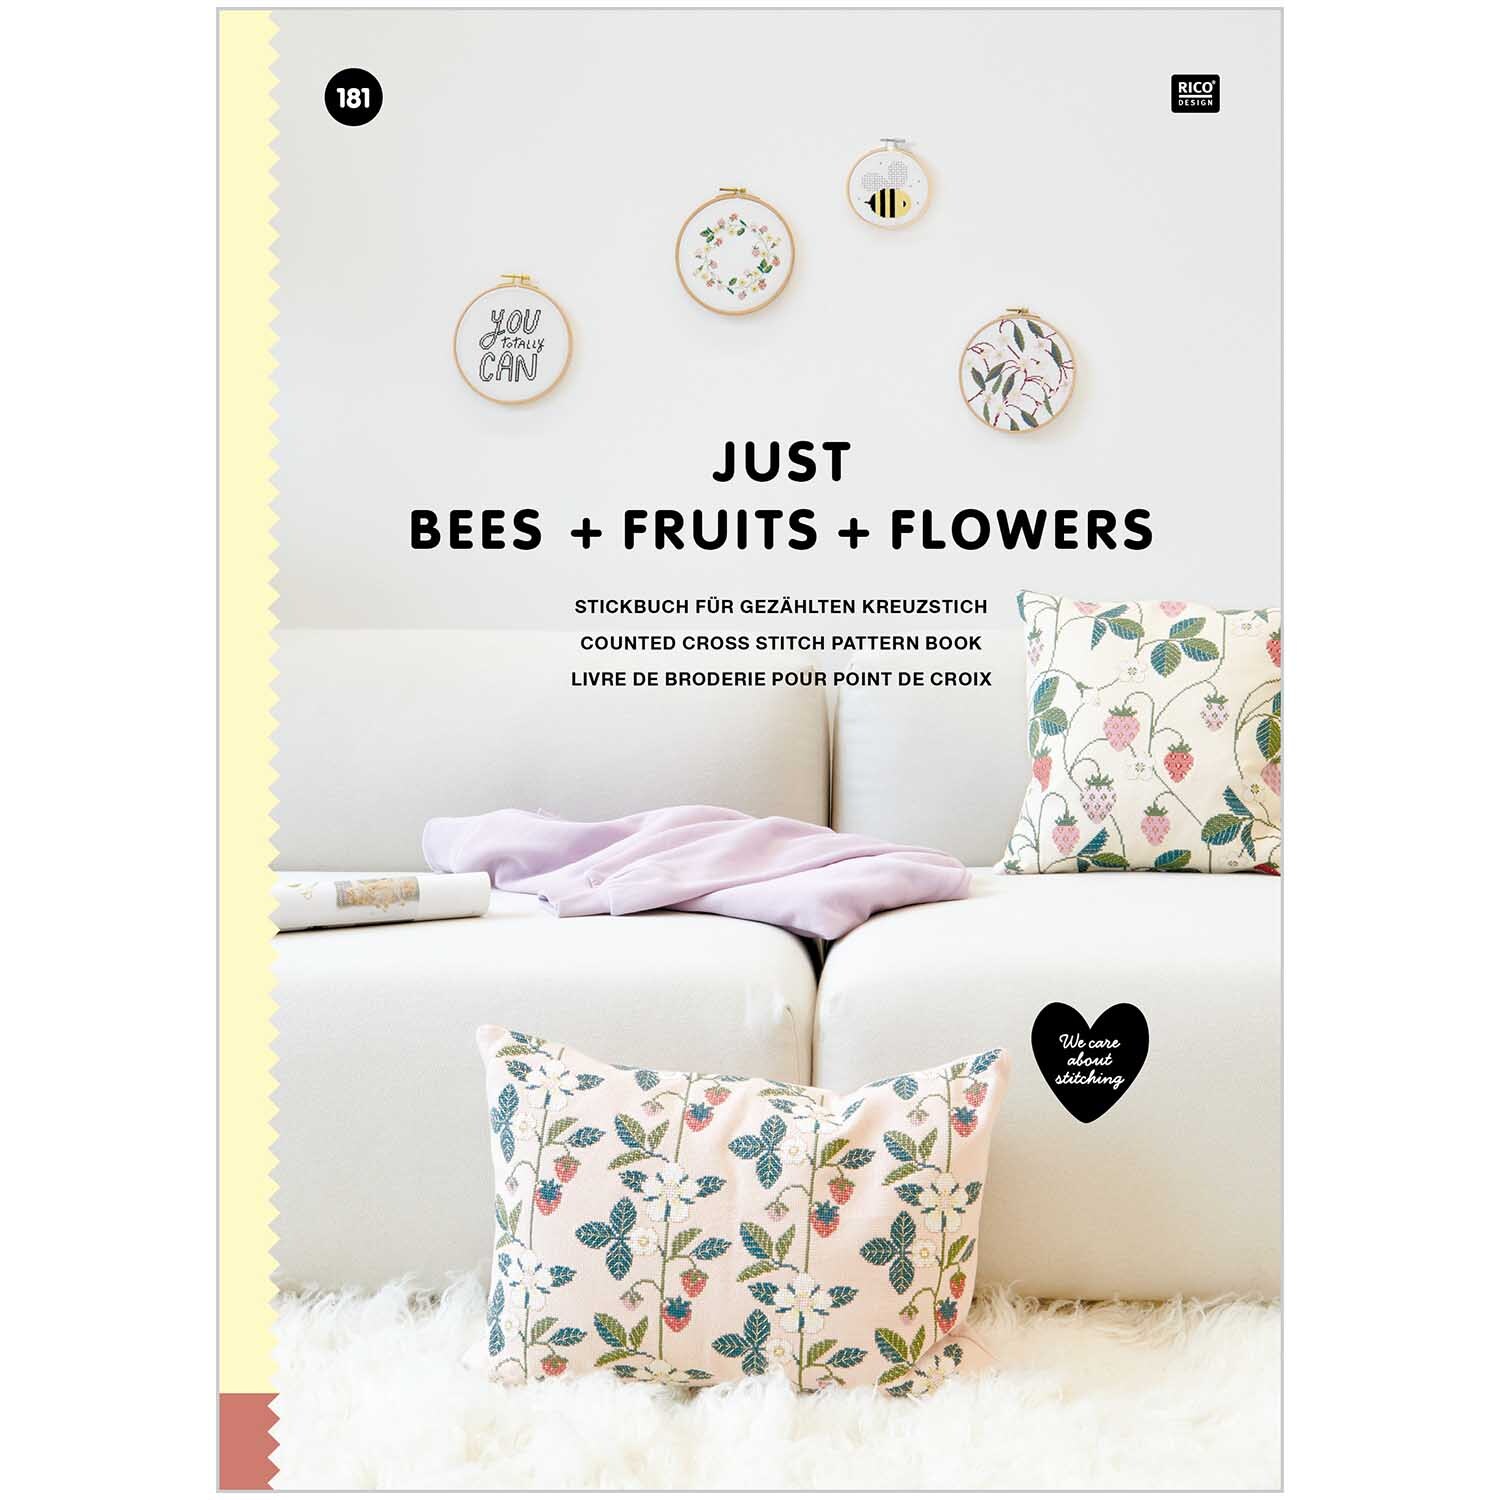 Stickbuch Just Bees + Fruits + Flowers Nr. 181